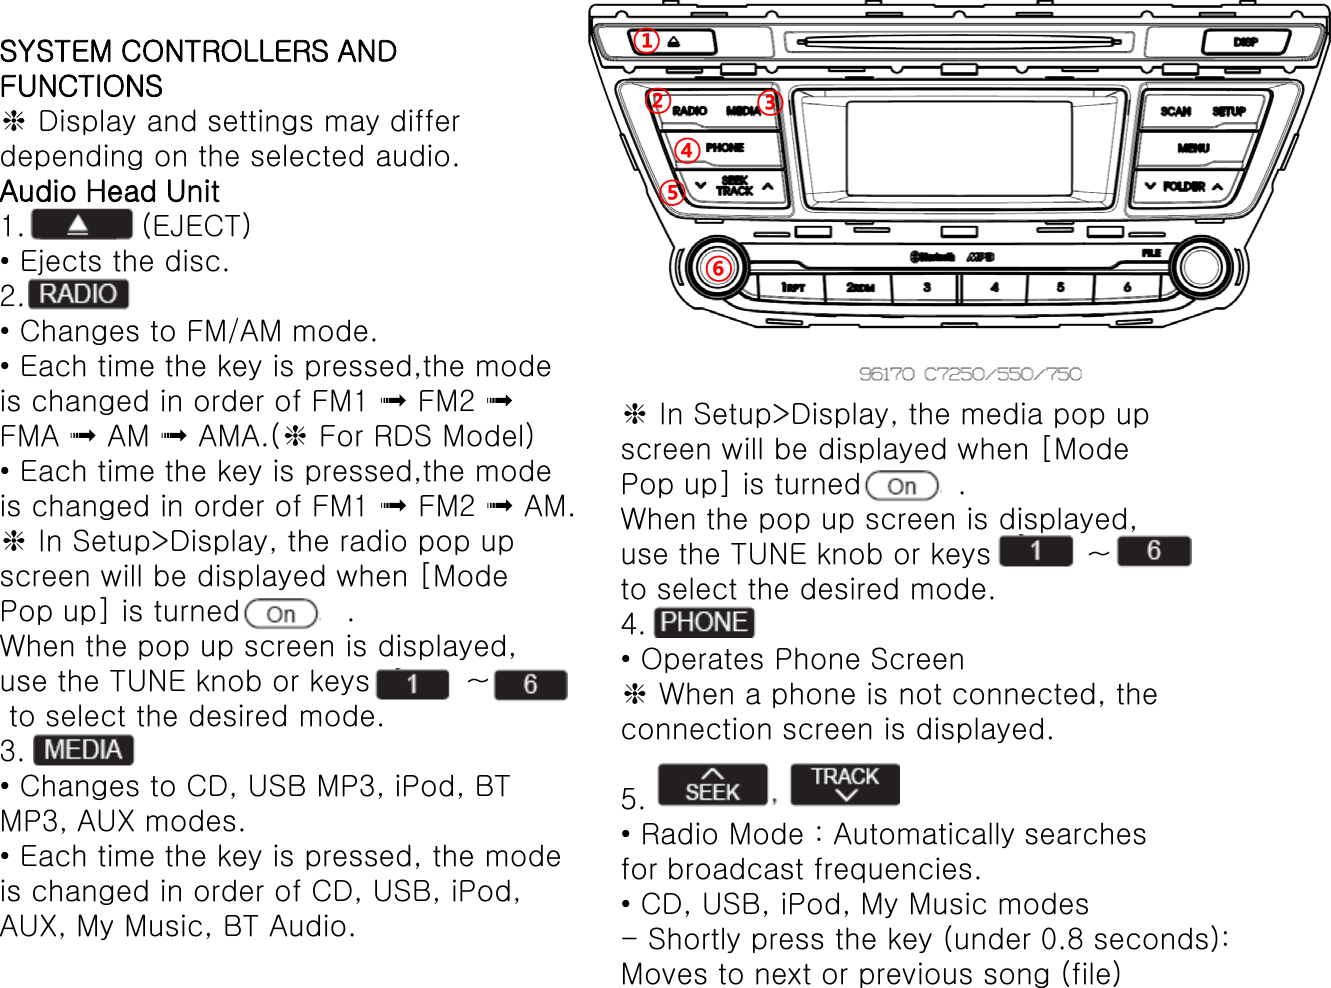 SYSTEM CONTROLLERS ANDFUNCTIONS❈Display and settings may differdepending on the selected audio.Audio Head Unit1.            (EJECT)• Ejects the disc.2.• Changes to FM/AM mode.• Each time the key is pressed,the modeis changed in order of FM1 ➟FM2 ➟FMA ➟AM ➟AMA.(❈For RDS Model)• Each time the key is pressed,the mode is changed in order of FM1 ➟FM2 ➟AM.❈In Setup&gt;Display, the radio pop upscreen will be displayed when [ModePop up] is turned           .When the pop up screen is displayed,use the TUNE knob or keys          ~ to select the desired mode.3.• Changes to CD, USB MP3, iPod, BTMP3, AUX modes.• Each time the key is pressed, the modeis changed in order of CD, USB, iPod,AUX, My Music, BT Audio.❈In Setup&gt;Display, the media pop upscreen will be displayed when [ModePop up] is turned          .When the pop up screen is displayed,use the TUNE knob or keys          ~  to select the desired mode.4.• Operates Phone Screen❈When a phone is not connected, theconnection screen is displayed.5. • Radio Mode : Automatically searchesfor broadcast frequencies.• CD, USB, iPod, My Music modes-Shortly press the key (under 0.8 seconds):Moves to next or previous song (file)①②③④⑤⑥